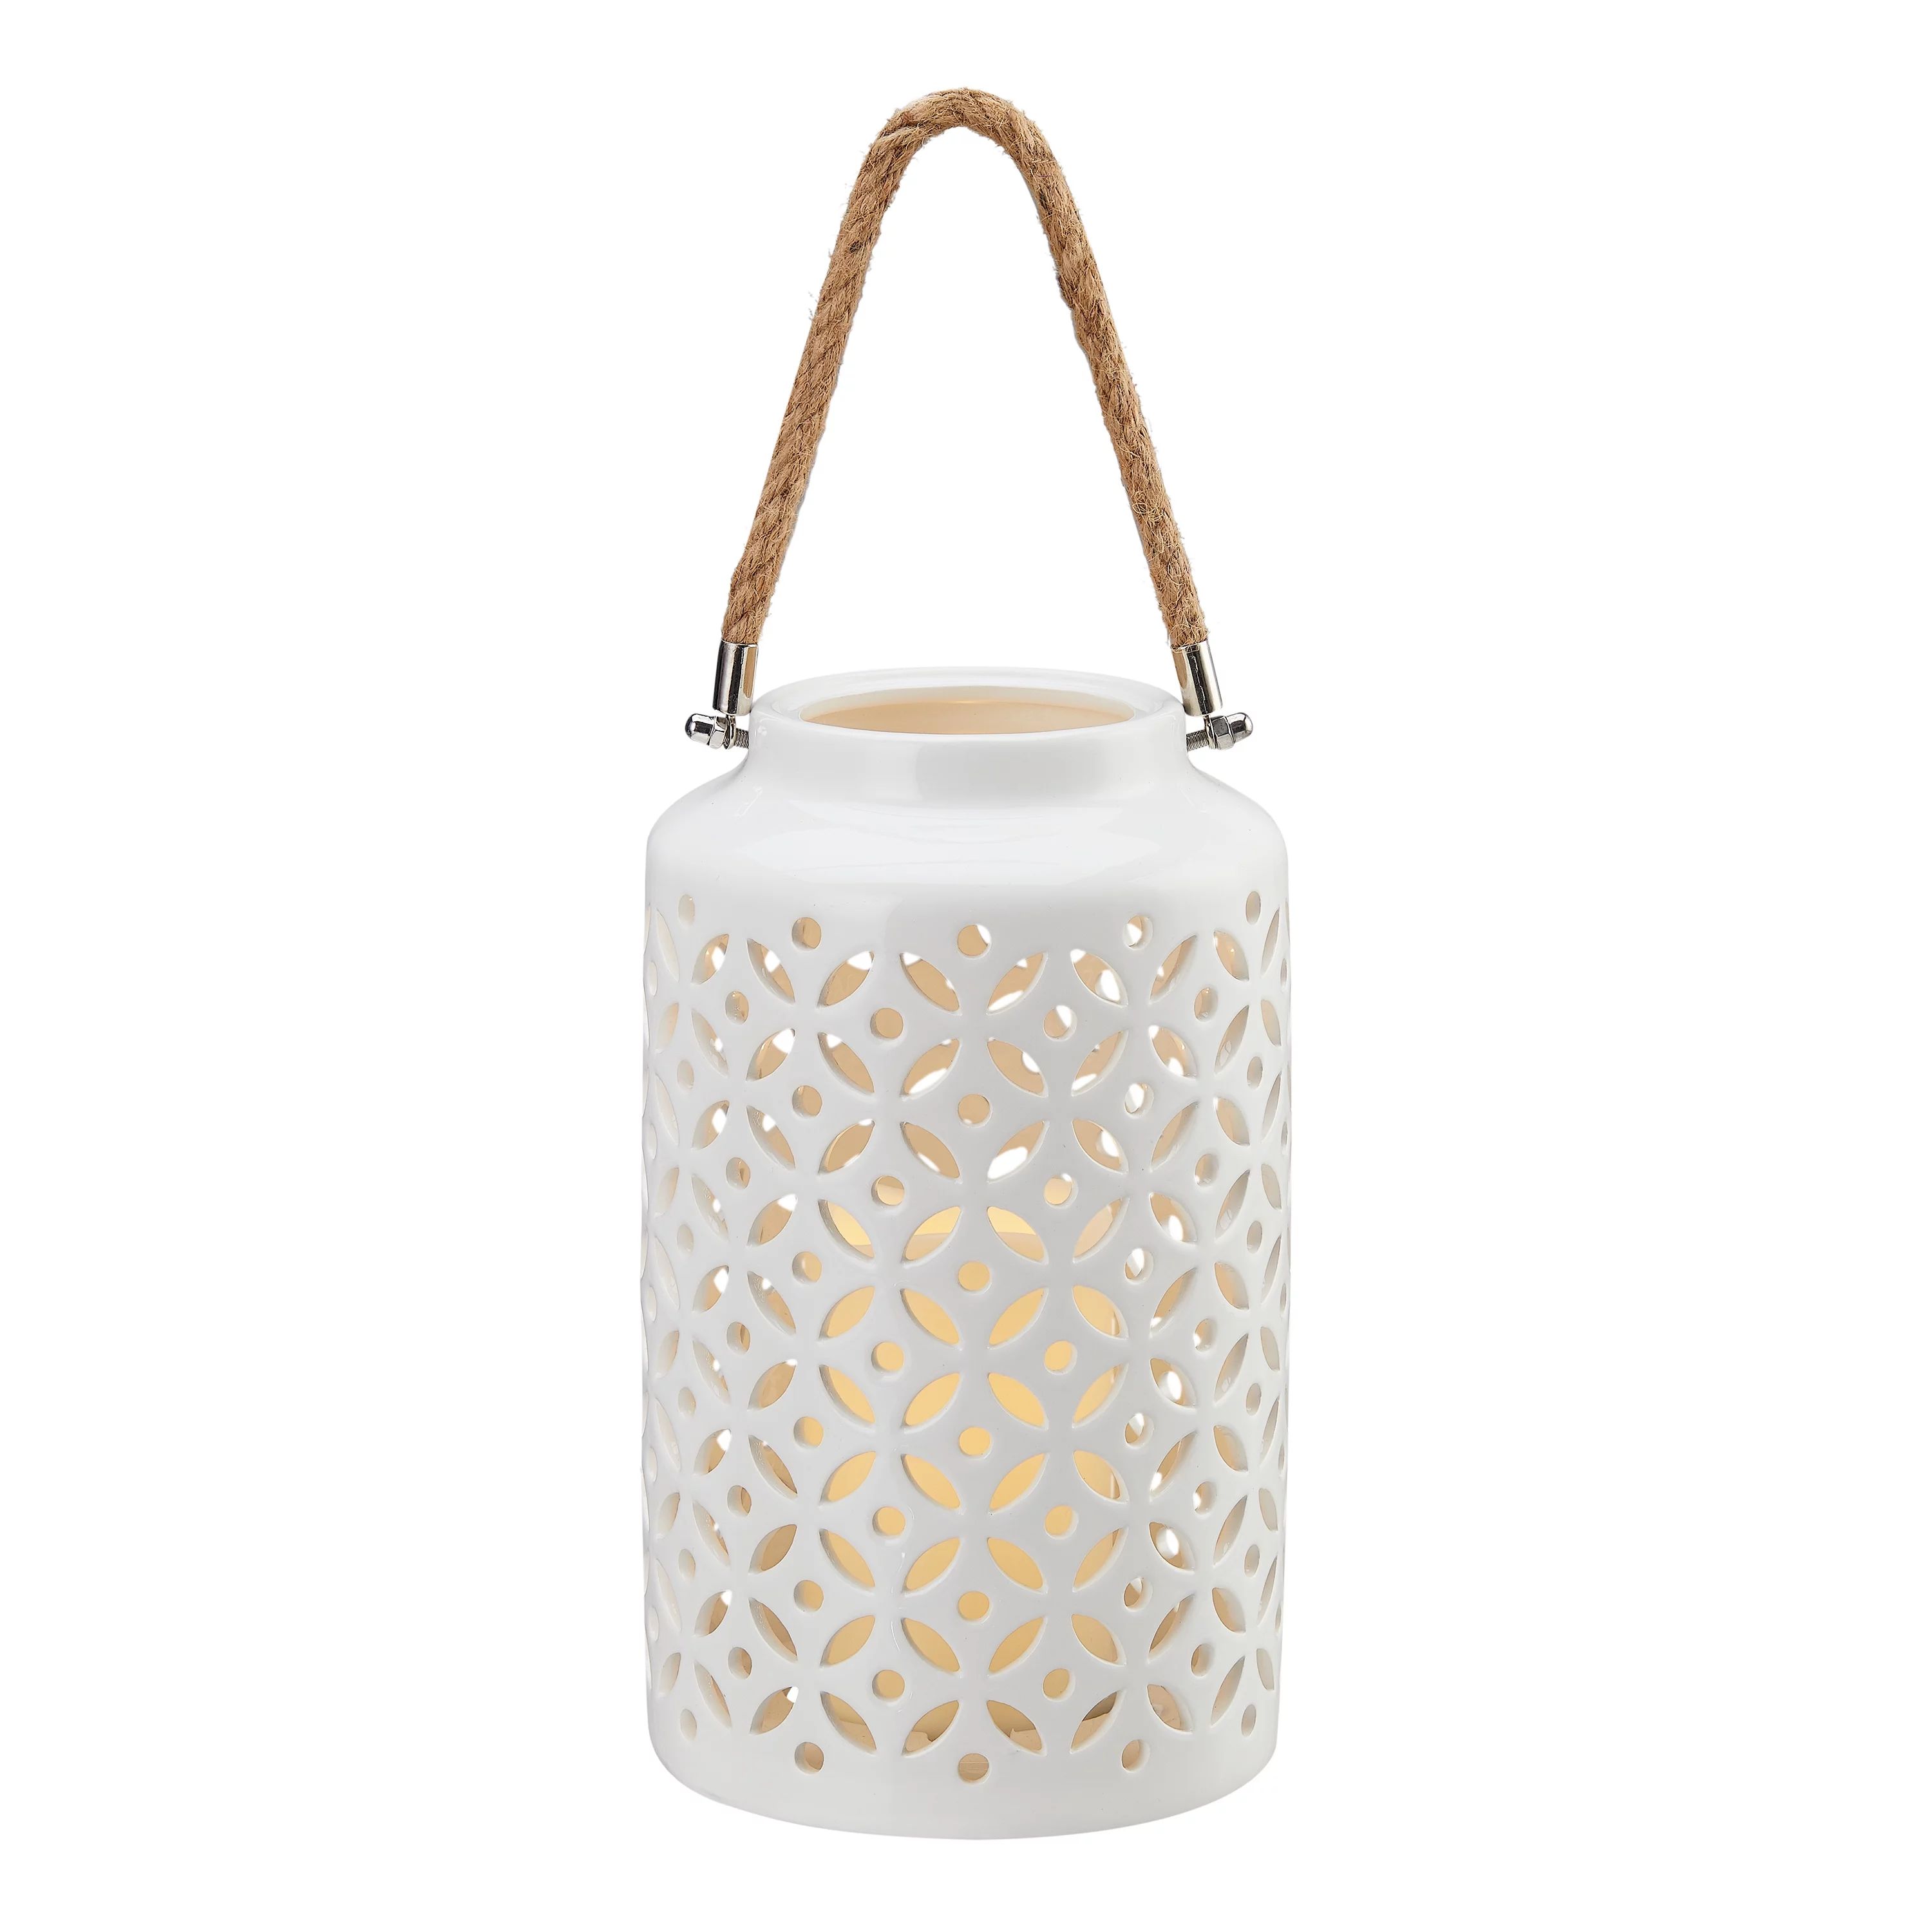 Better Homes & Gardens 10" White Ceramic Lantern with Removable Flickering Candle | Walmart (US)